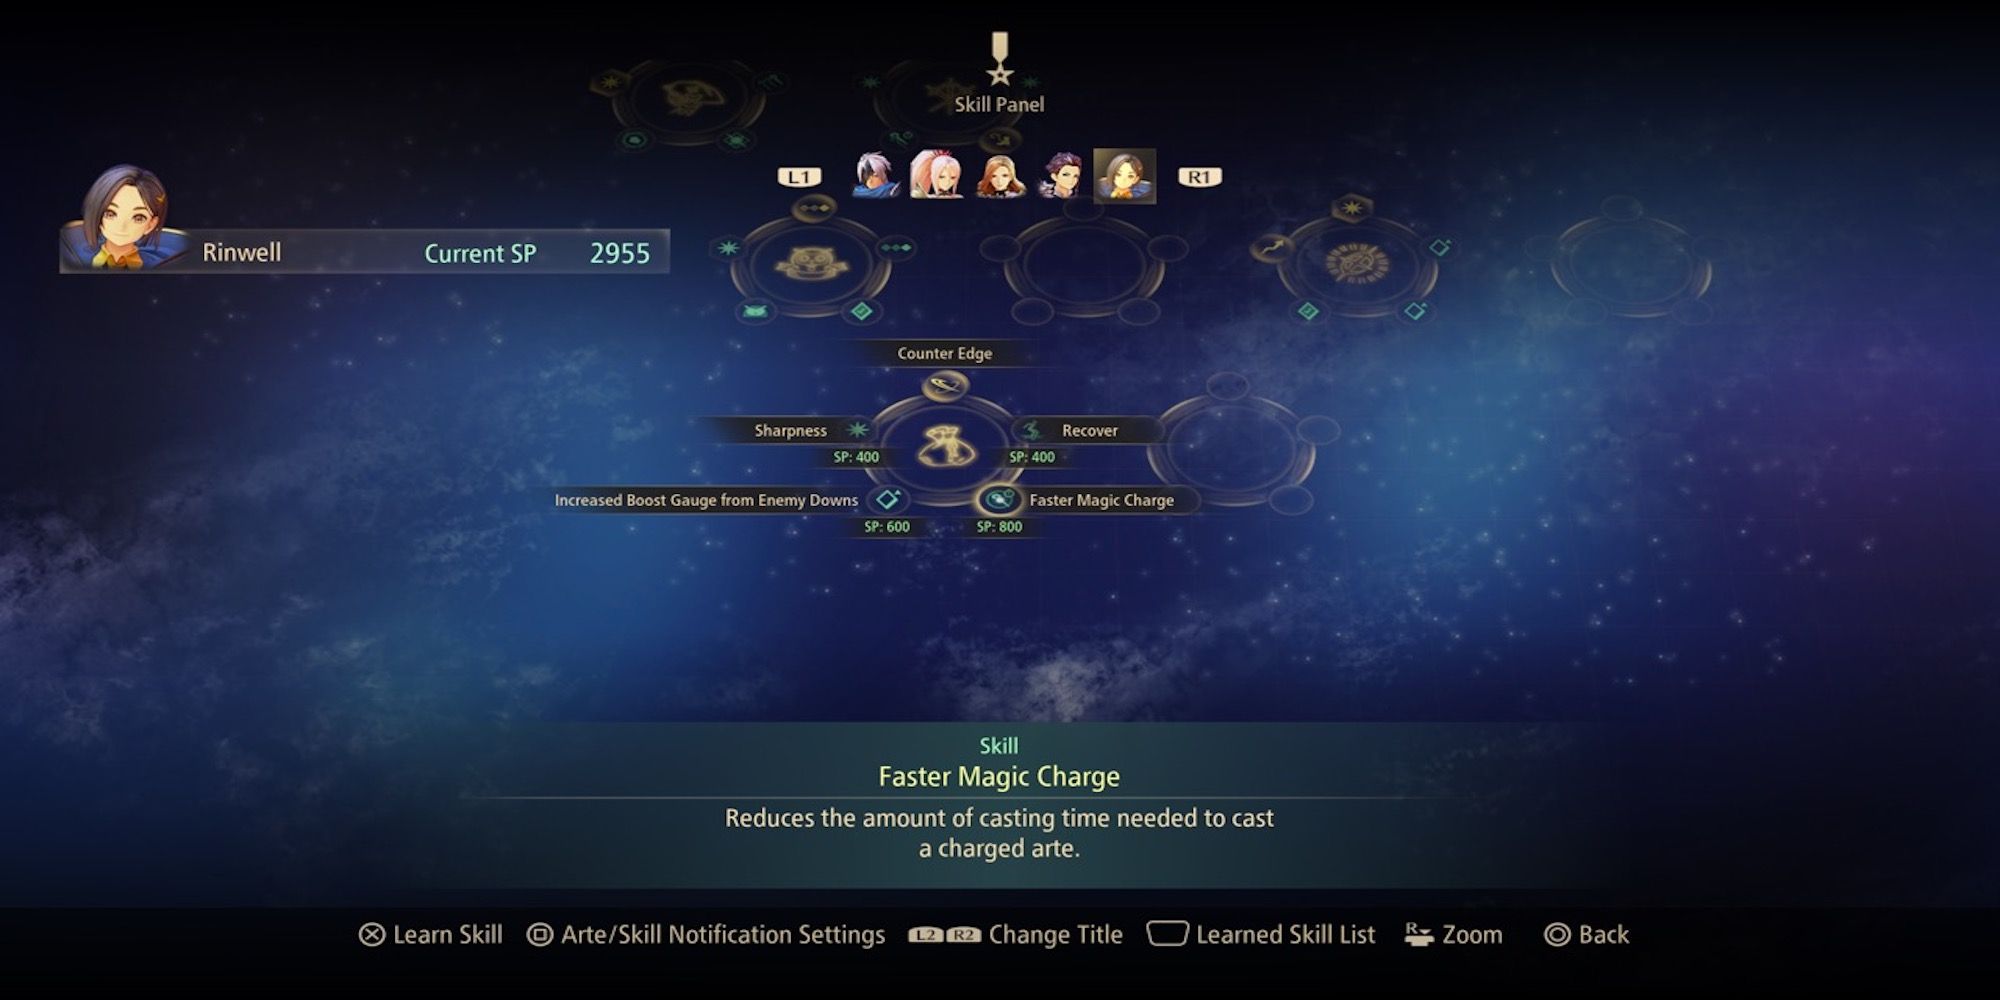 Faster Magic Charge skill in skill menu from Tales of Arise